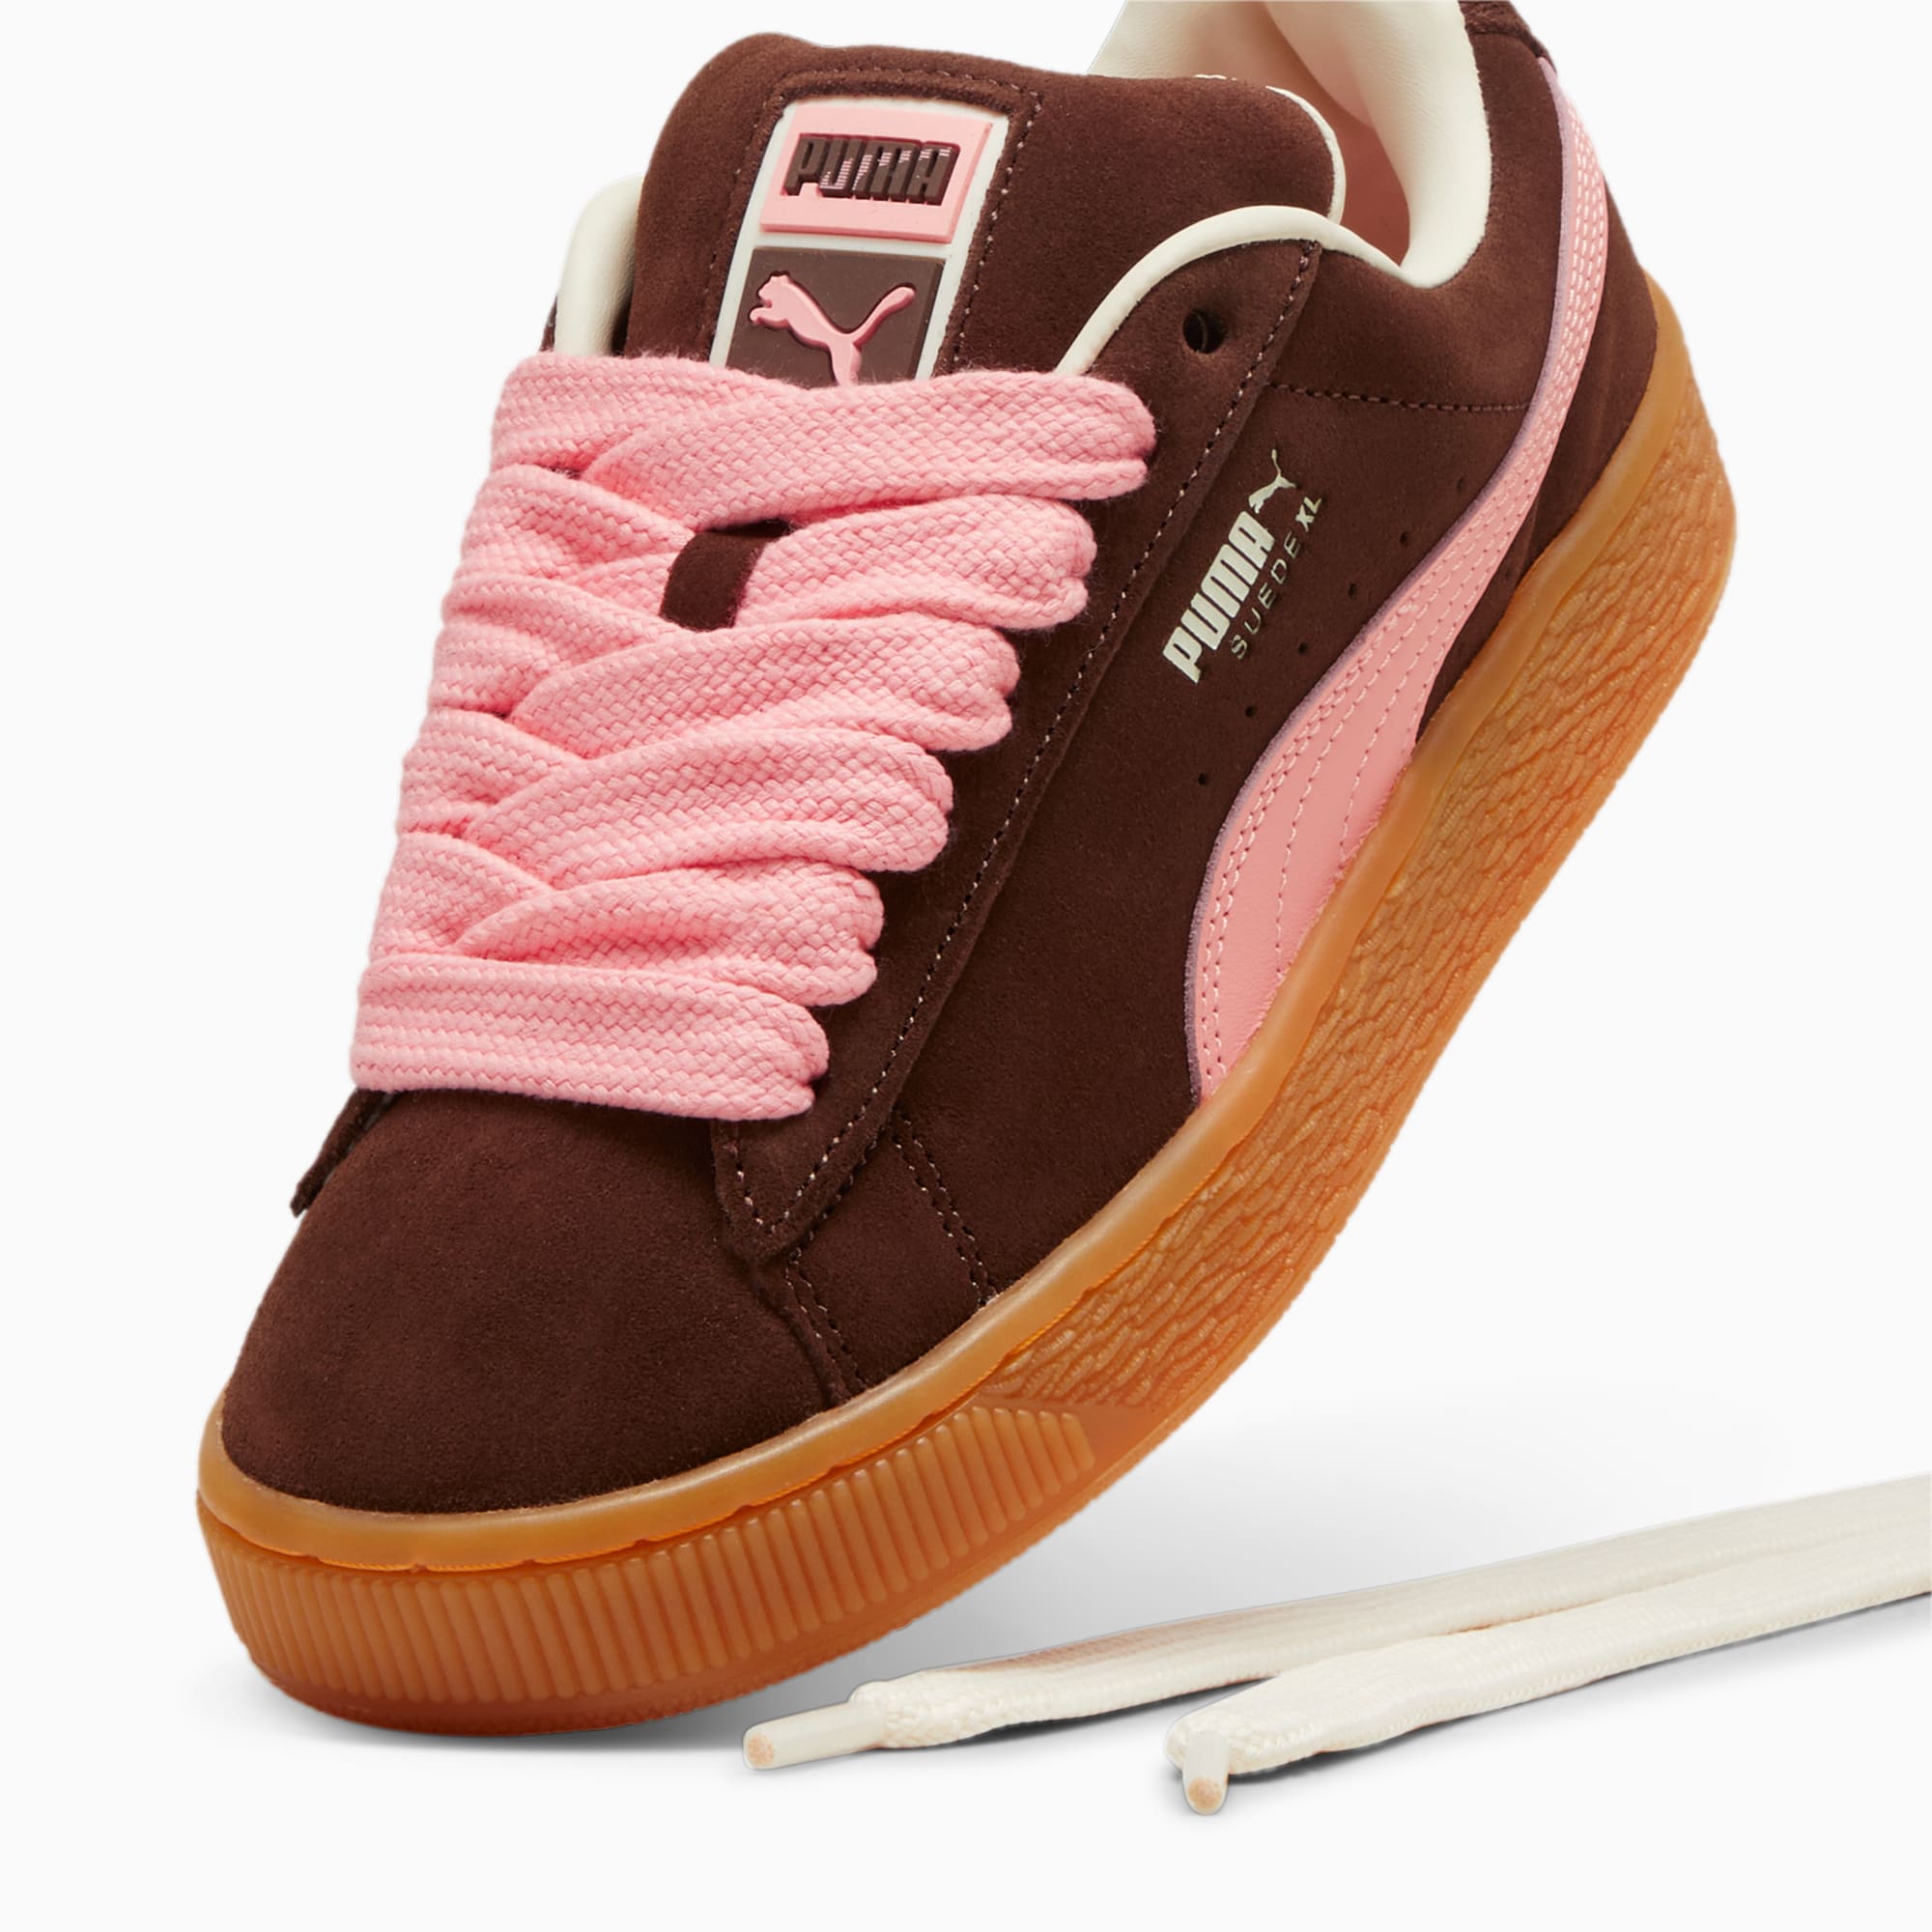 PUMA Suede Xl Sneakers Women, Chestnut Brown/Peach Smoothie/Frosted Ivory, Size 35,5, Shoes